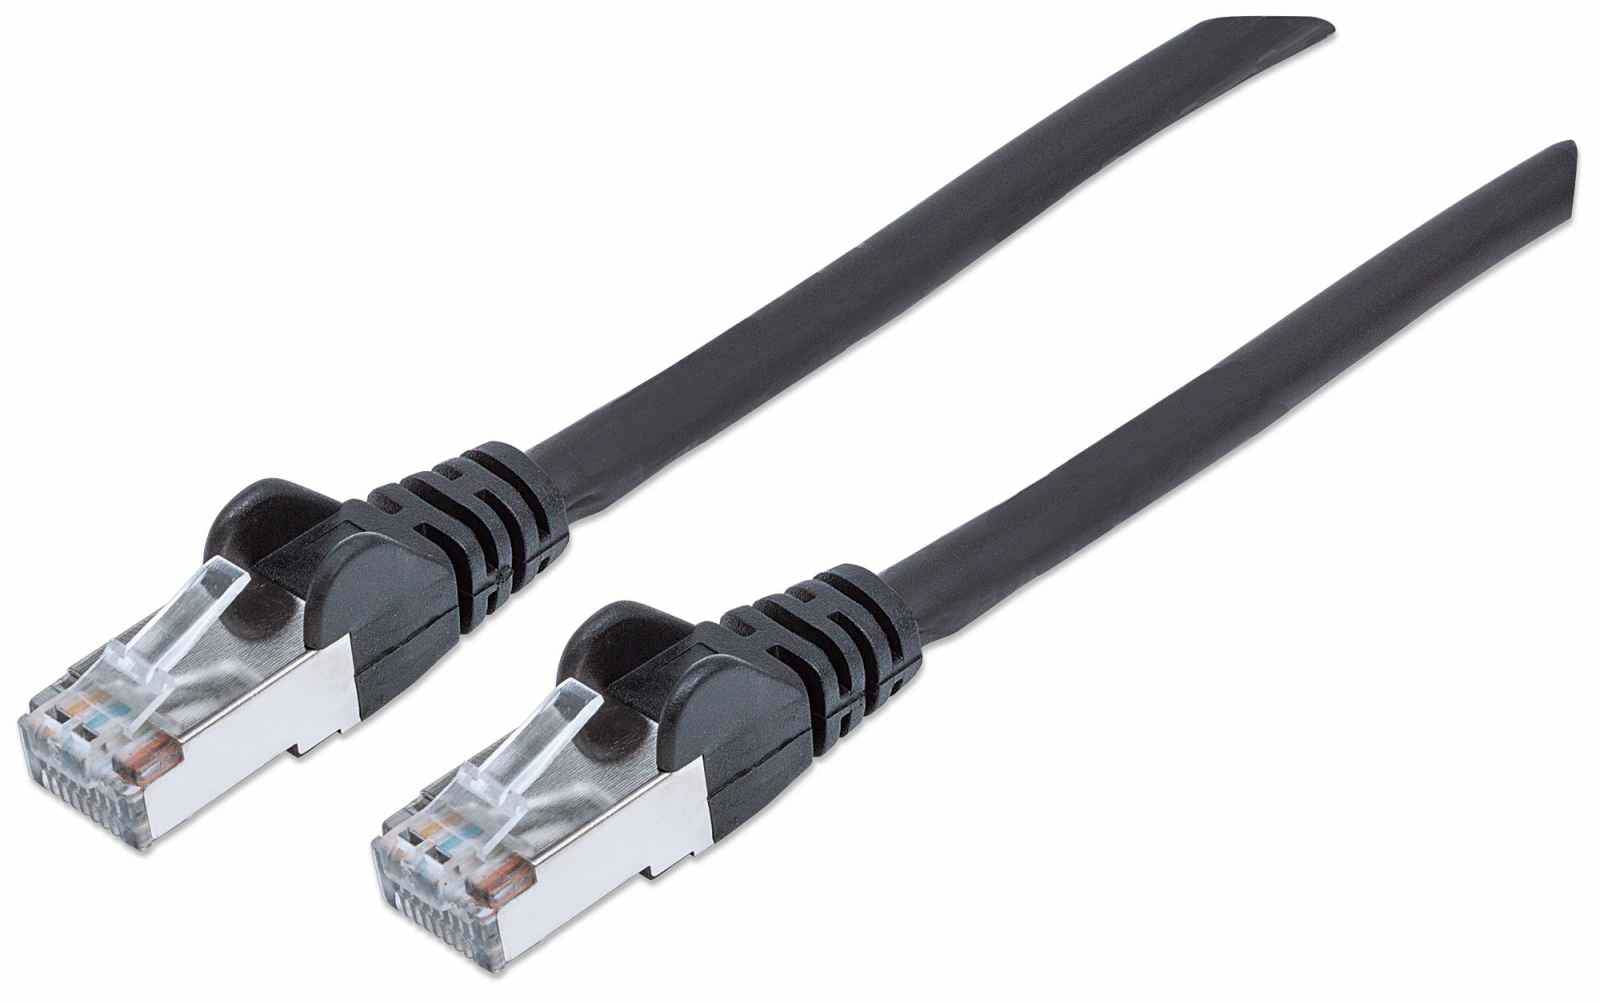 Intellinet Network Patch Cable, Cat7 Cable/Cat6A Plugs, 10m, Black, Copper, S/FTP, LSOH / LSZH, PVC, RJ45, Gold Plated Contacts, Snagless, Booted, Lifetime Warranty, Polybag